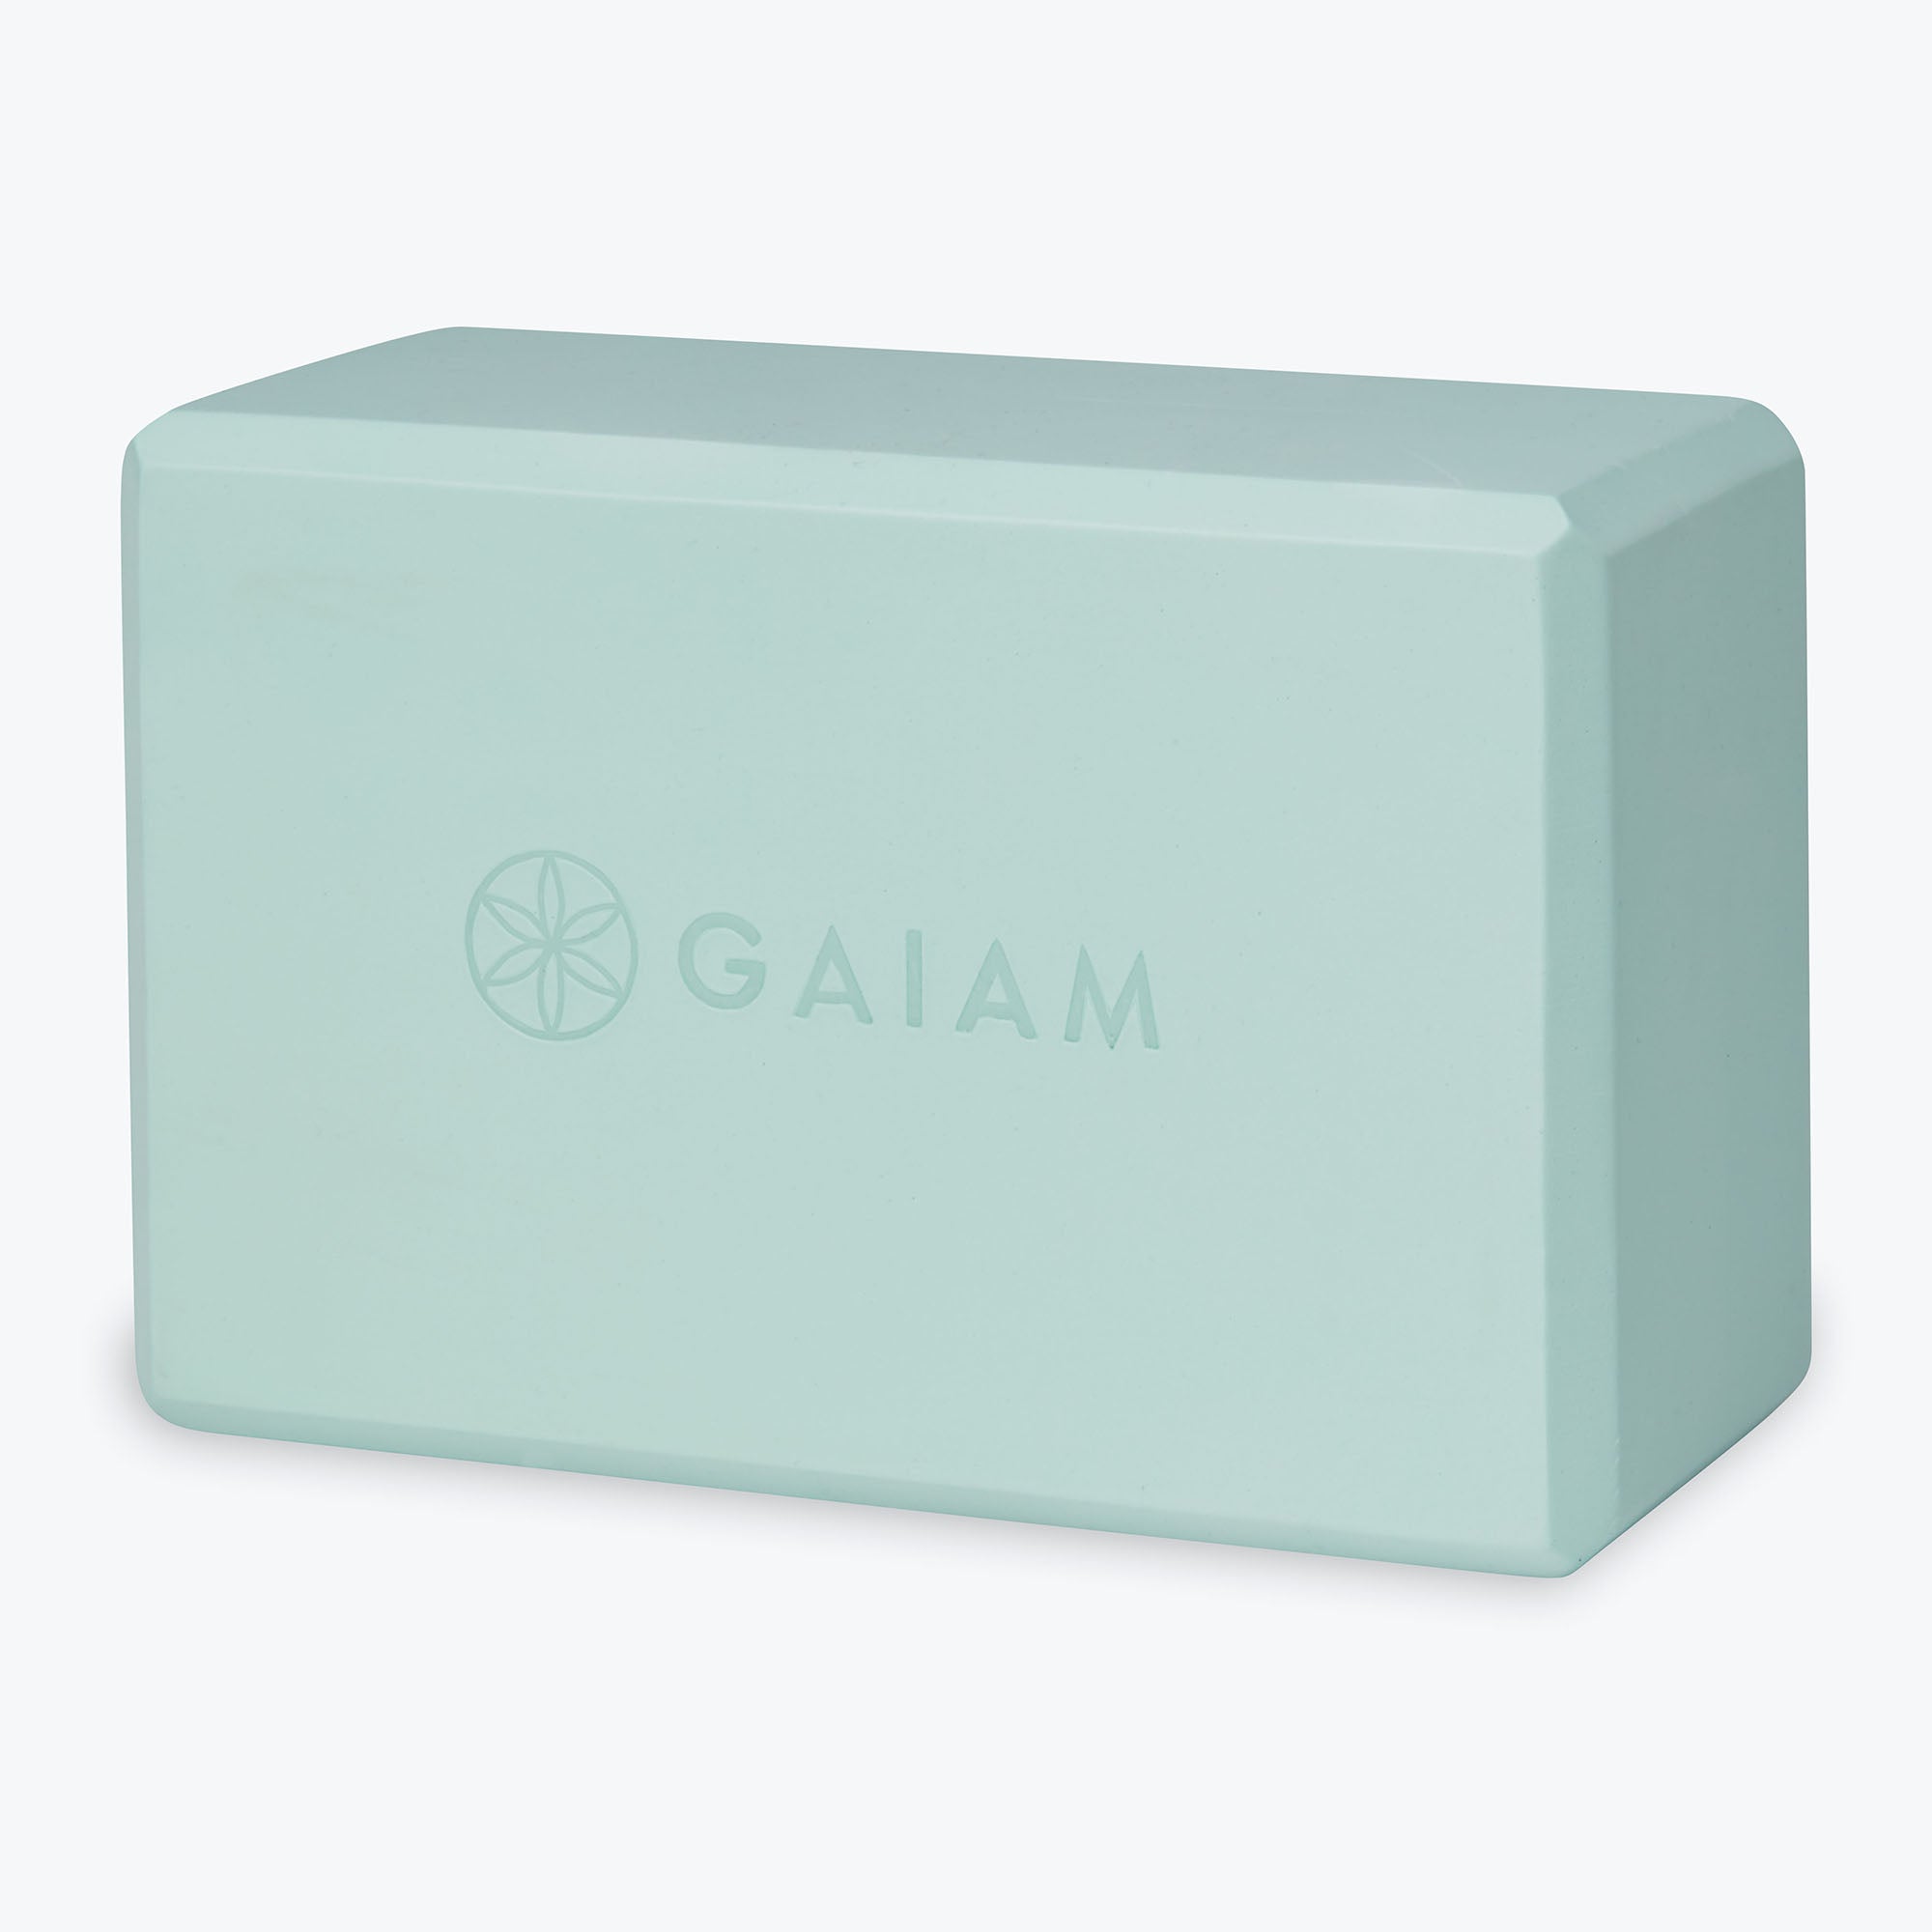  Gaiam Essentials Yoga Block (Set Of 2) - Supportive Foam  Blocks - Soft Non-Slip Surface for Yoga, Pilates, Meditation - Easy-Grip  Beveled Edges - Helps with Alignment and Motion 